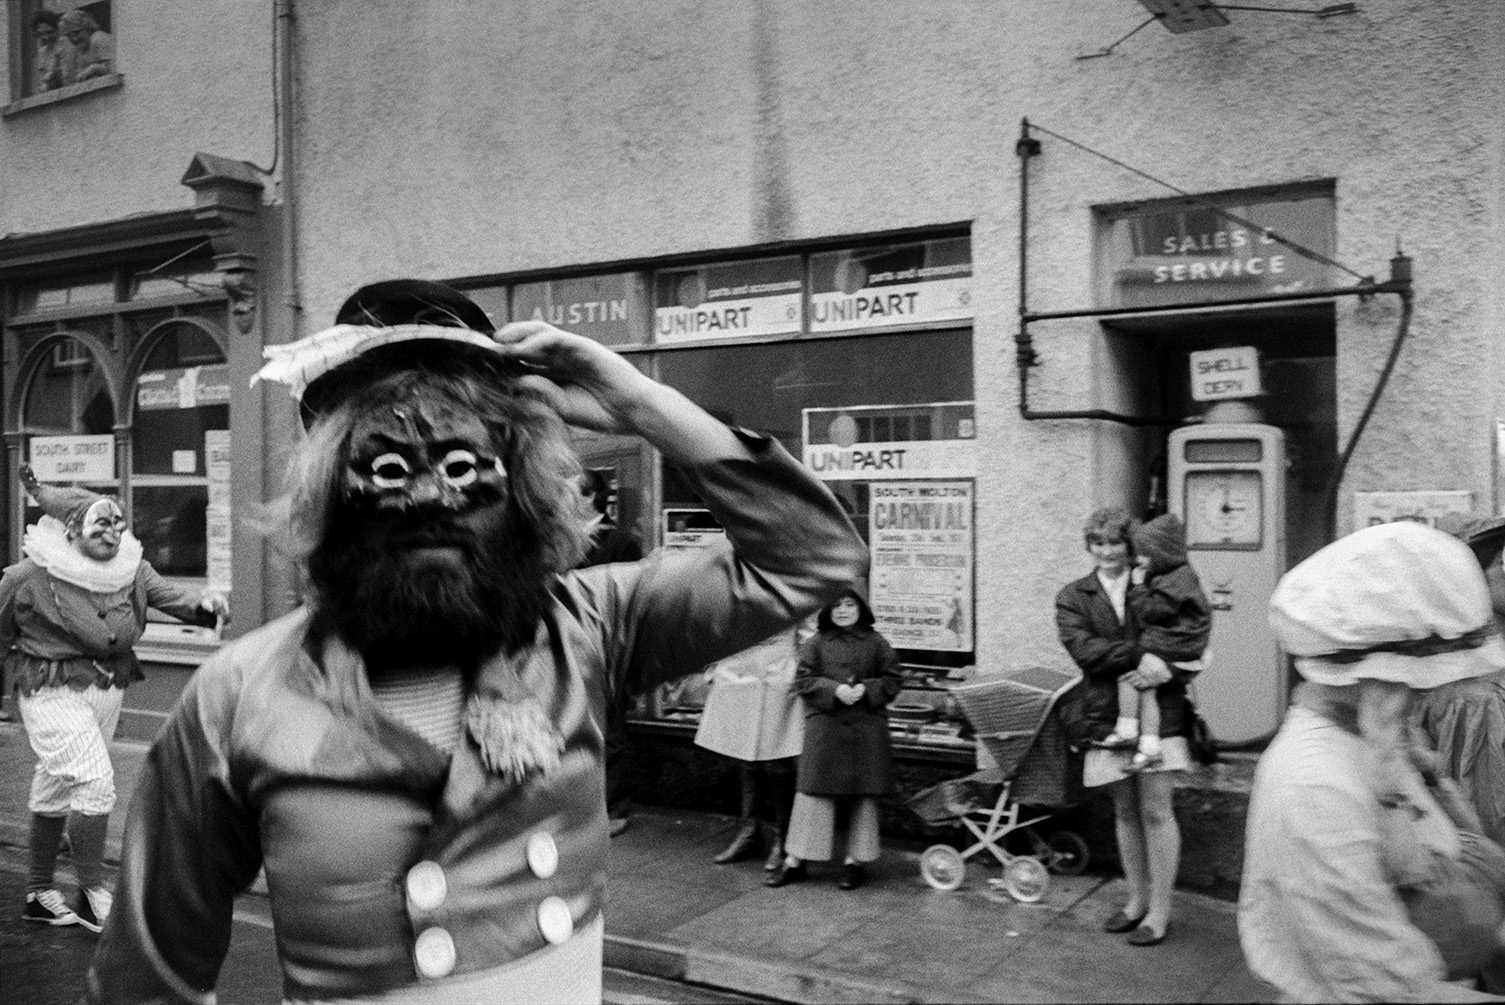 Spectators outside a shop front watching people in masks and costumes in South Molton carnival parade. A woman holding a child is stood by a pram and petrol pump, watching the parade.